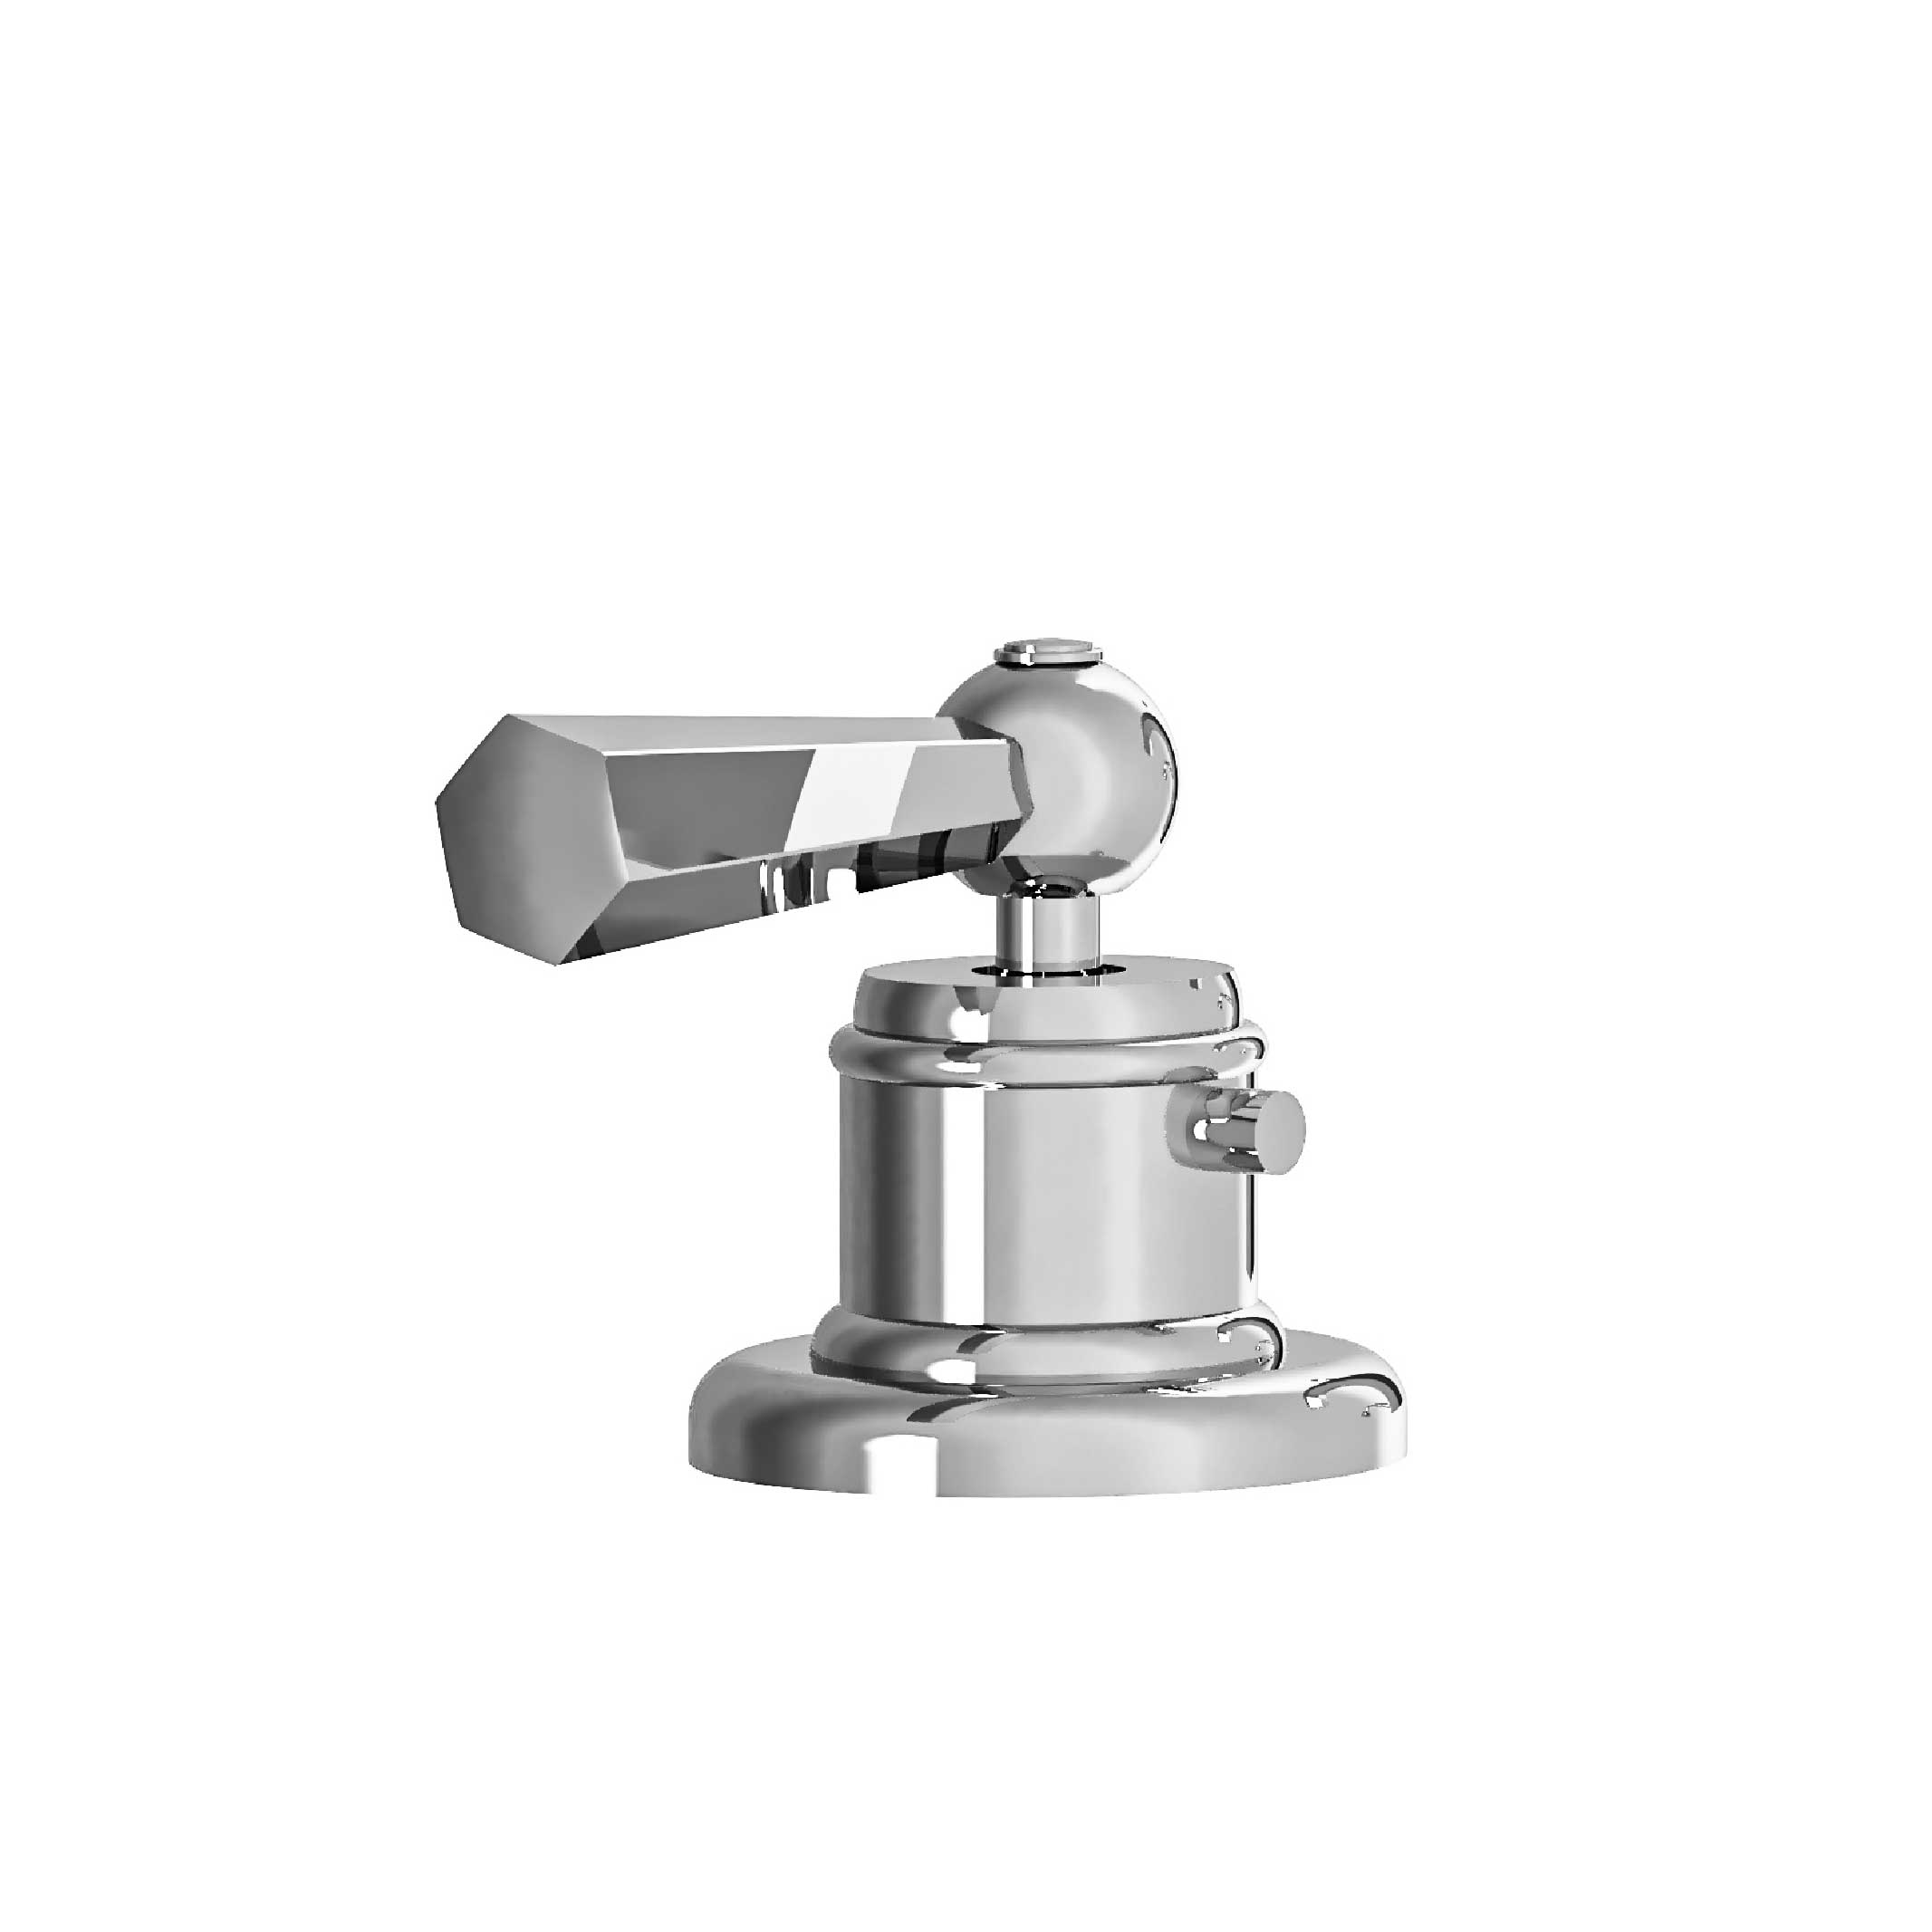 M39-330T Rim mounted thermo mixer